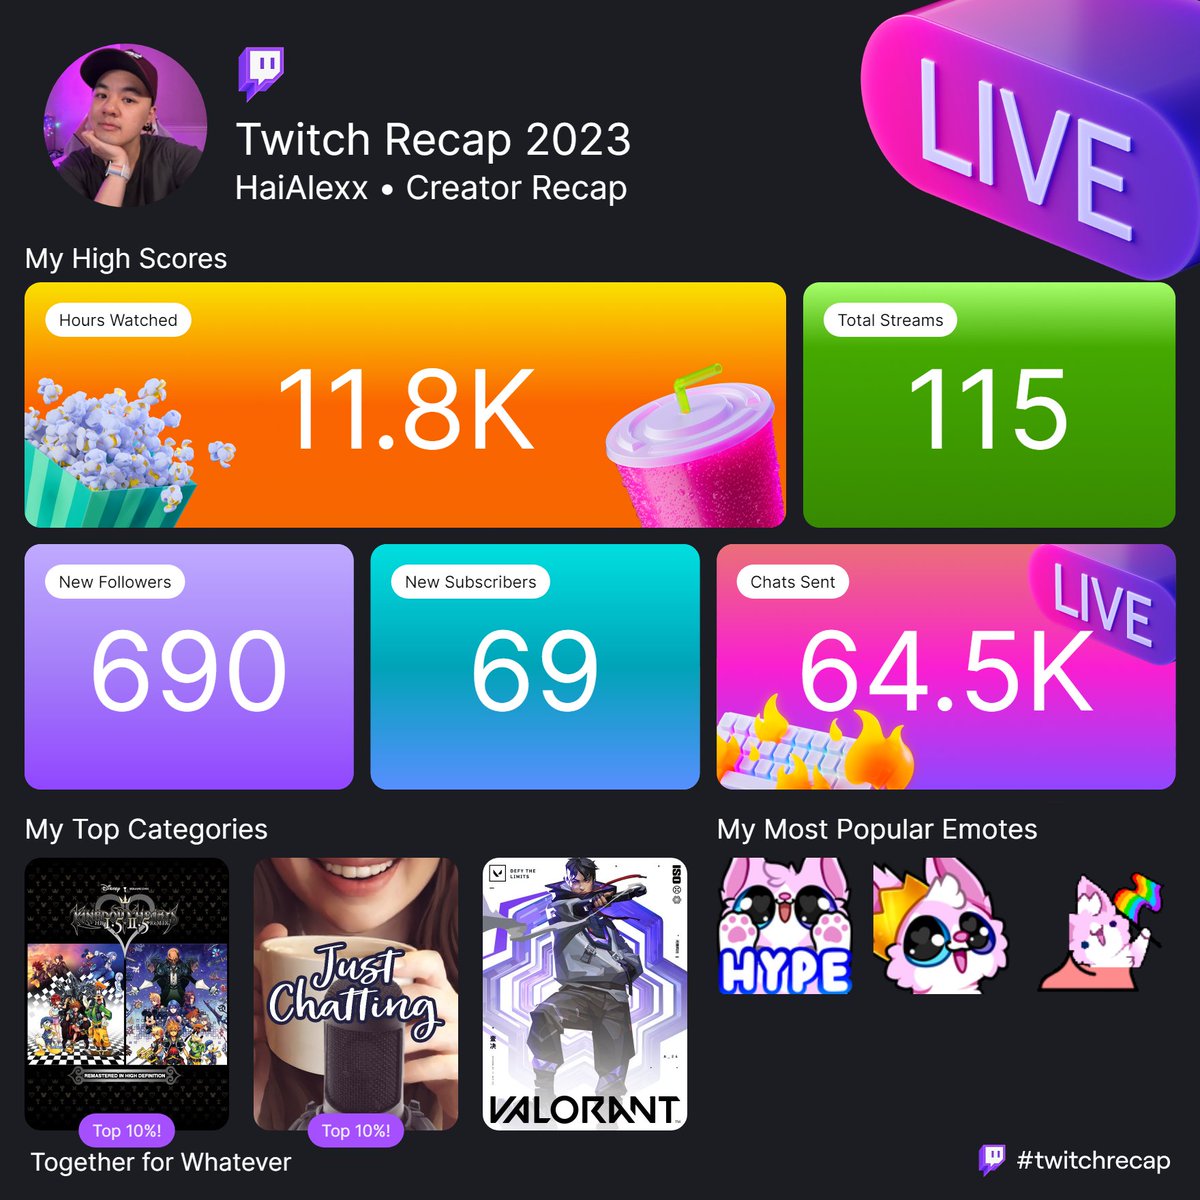 I love how we got 69 new subs and 690 new followers *noice* Thank you so much everyone for the support and love this year, I'm excited for 2024 and what that brings. Also I didn't realise people liked seeing me fail at Valorant LOL @Twitch_ANZ #twitchrecap